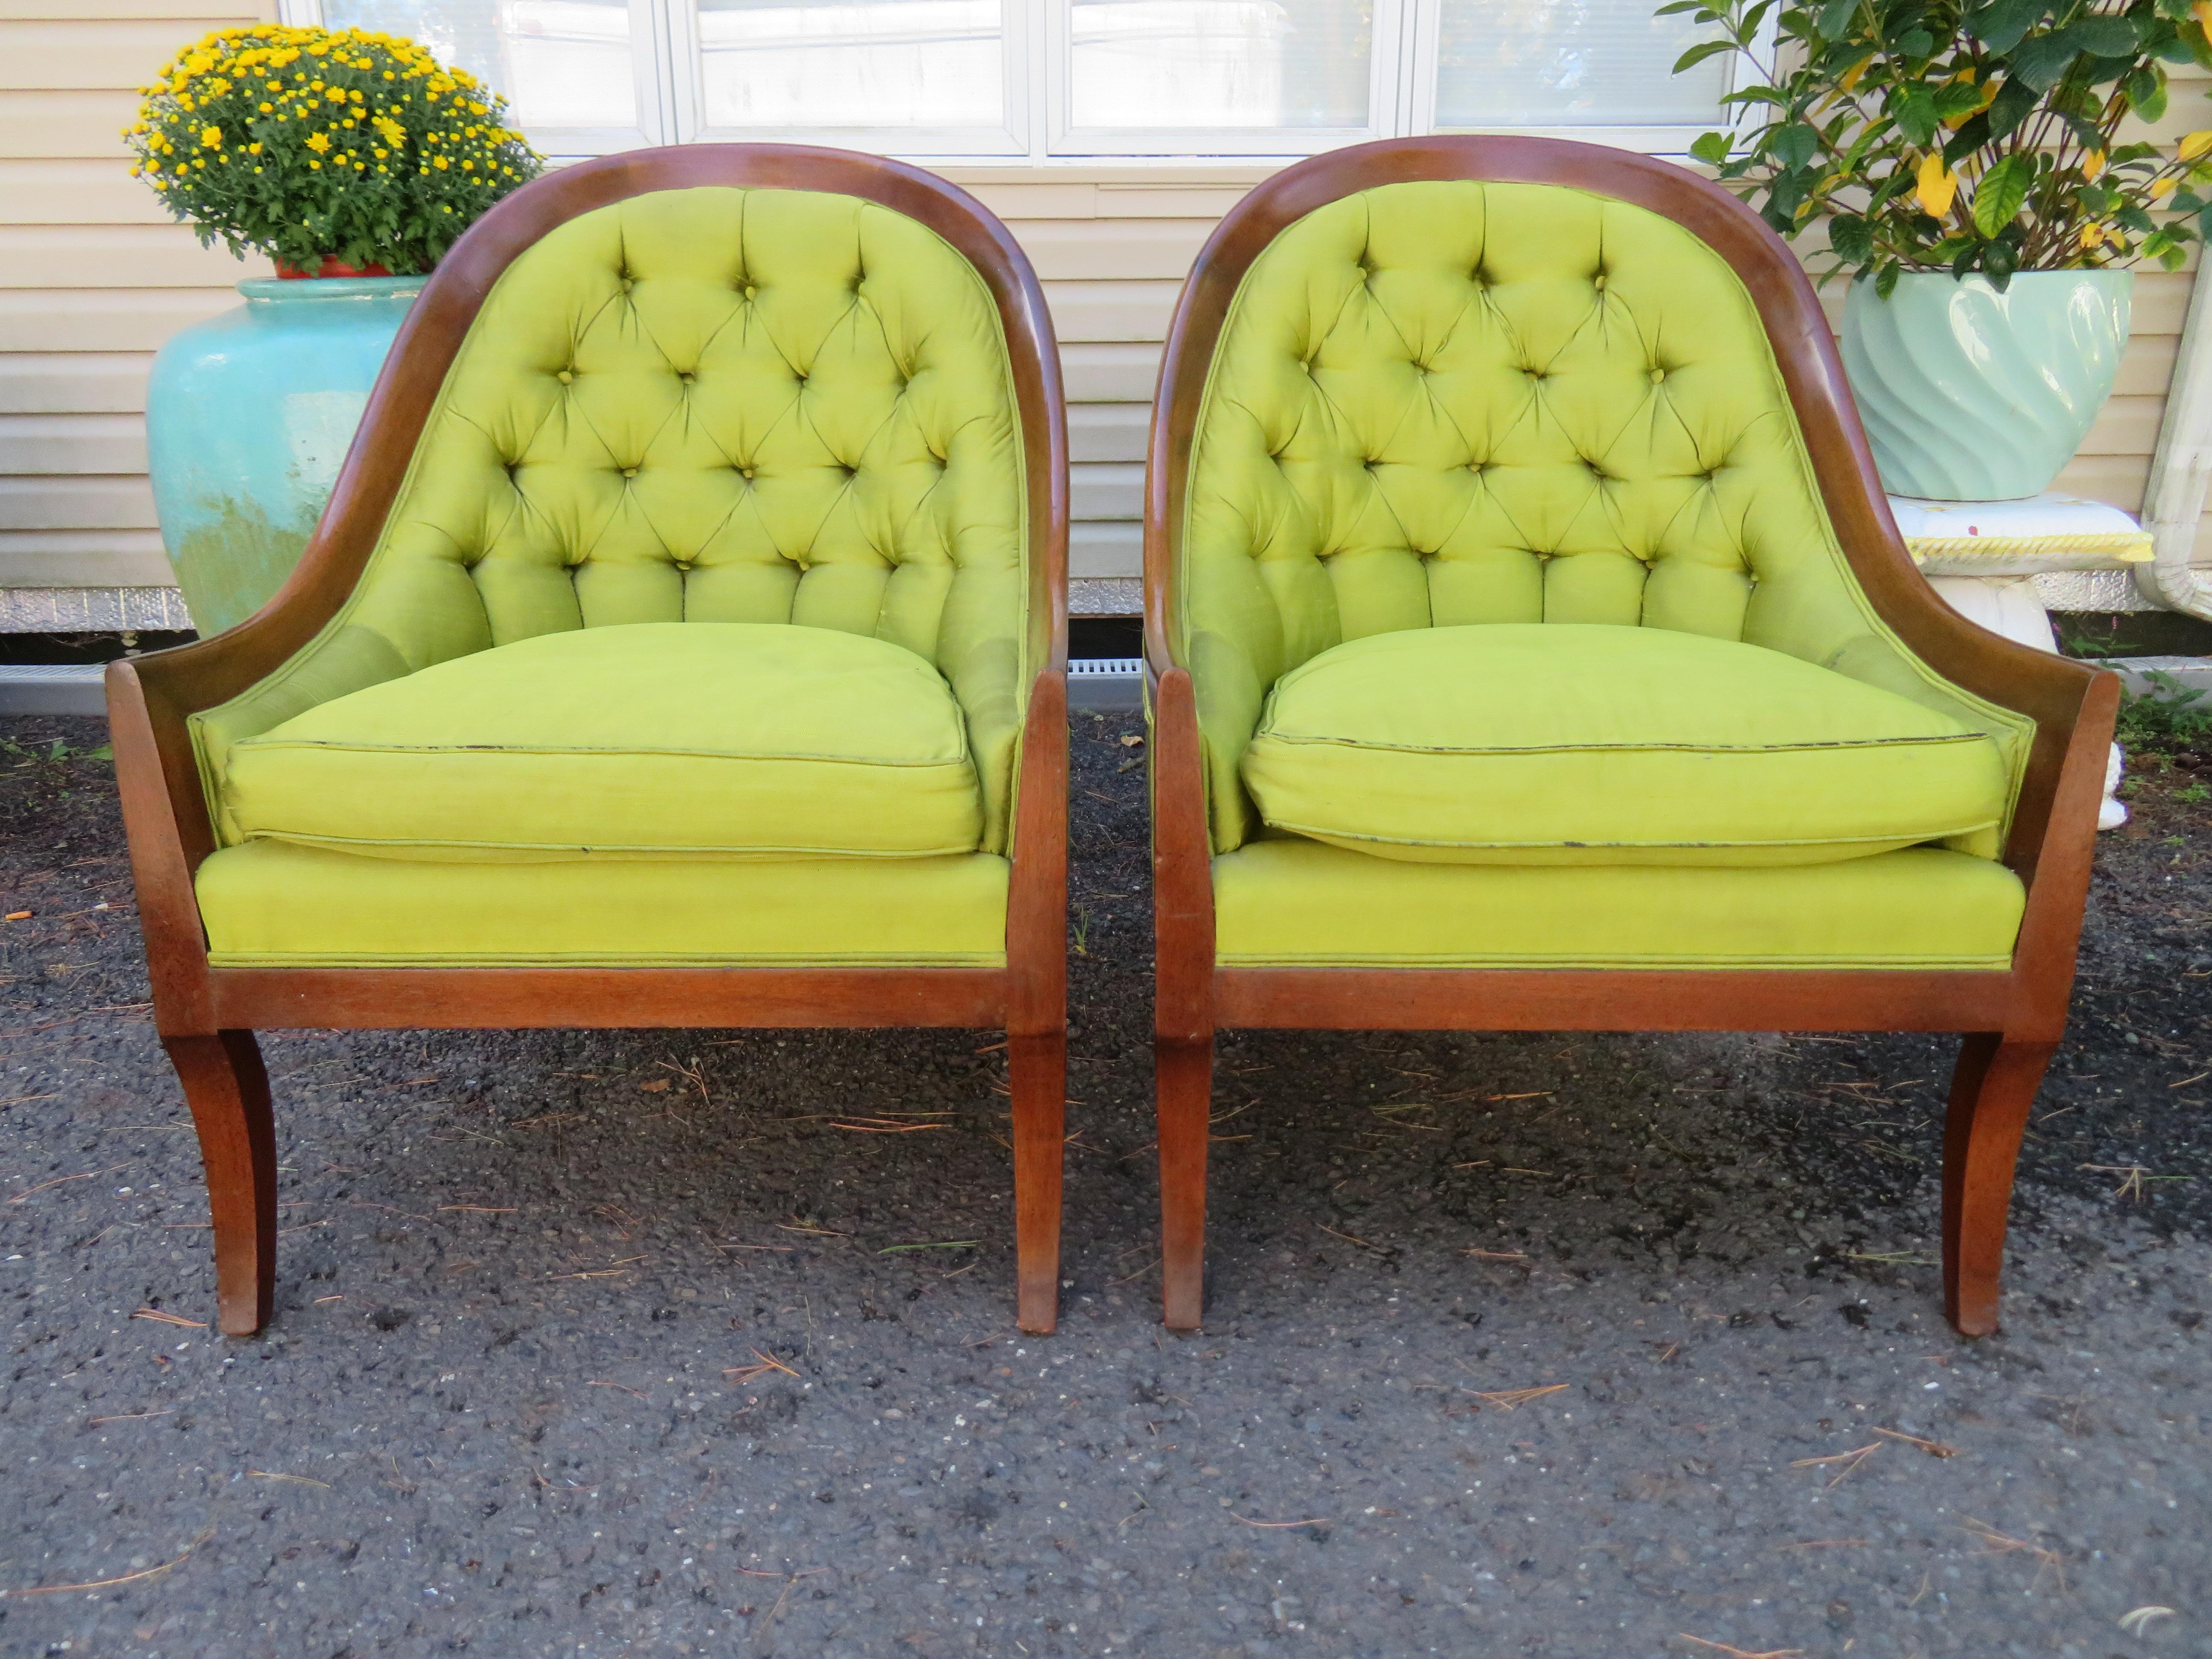 Lovely pair of Mid-century spoon-back chairs. We love the intentionally distressed fruitwood frame with the tufted back. The upholstery is worn and frayed around the edges and will need to be reupholstered. They measure 35.5